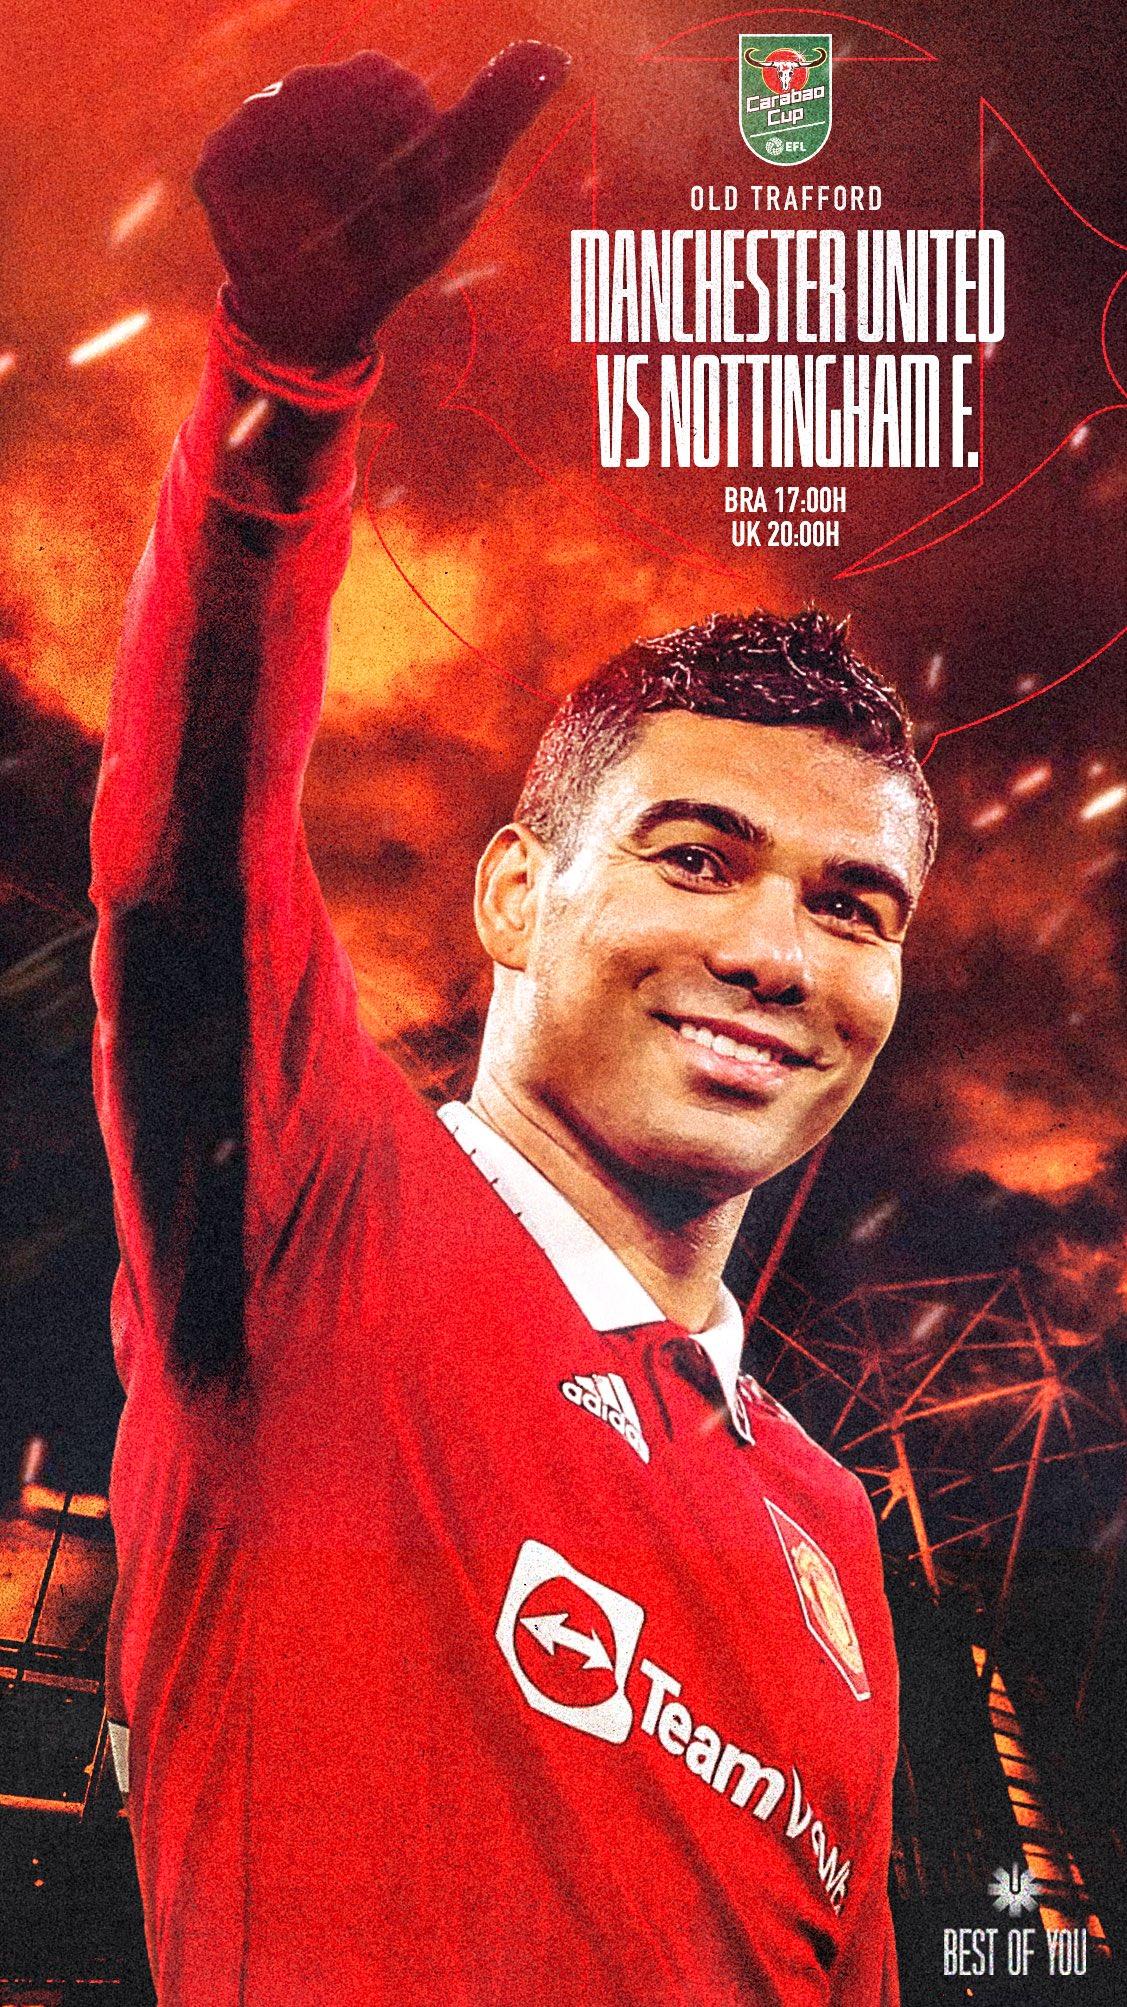 Casemiro on ITS MATCHDAY Come on United